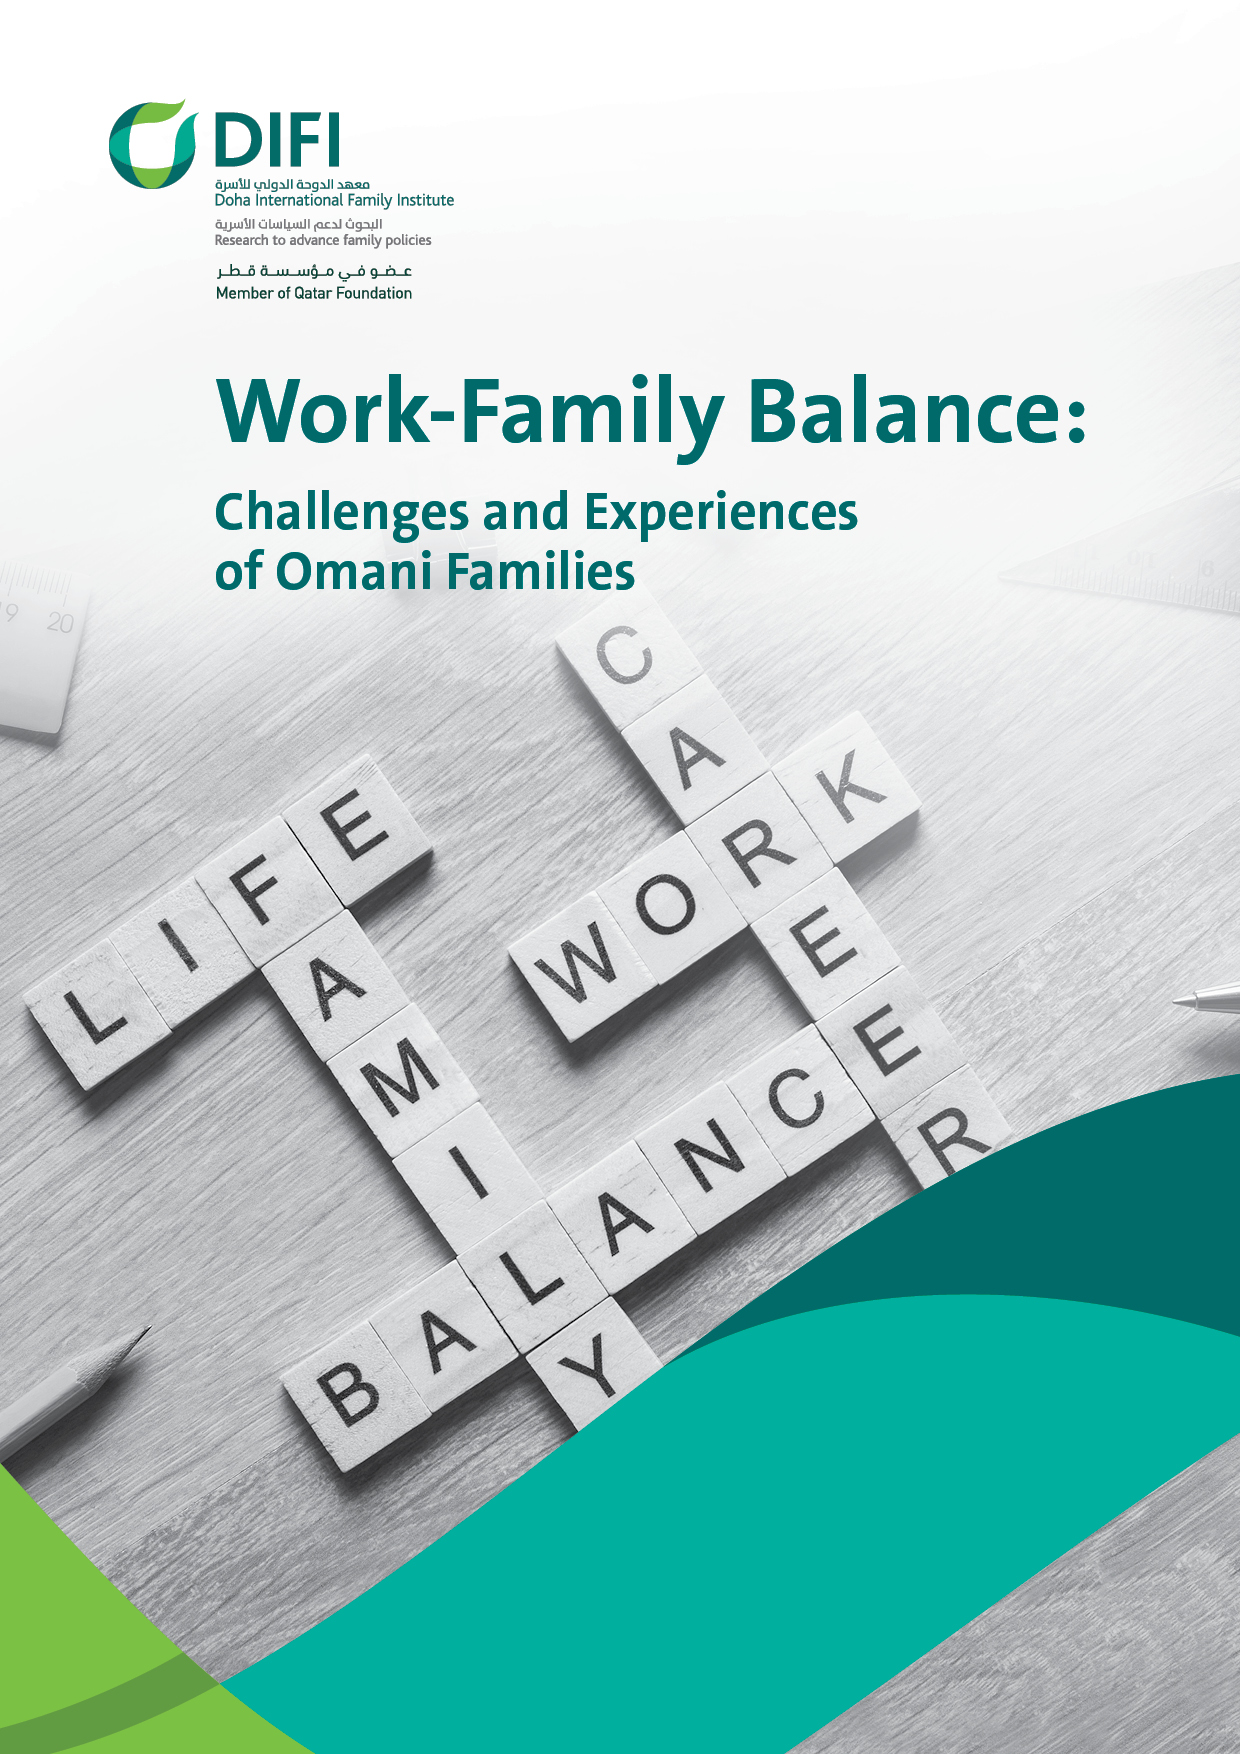 Work-Family Balance: Challenges and Experiences of Omani Families